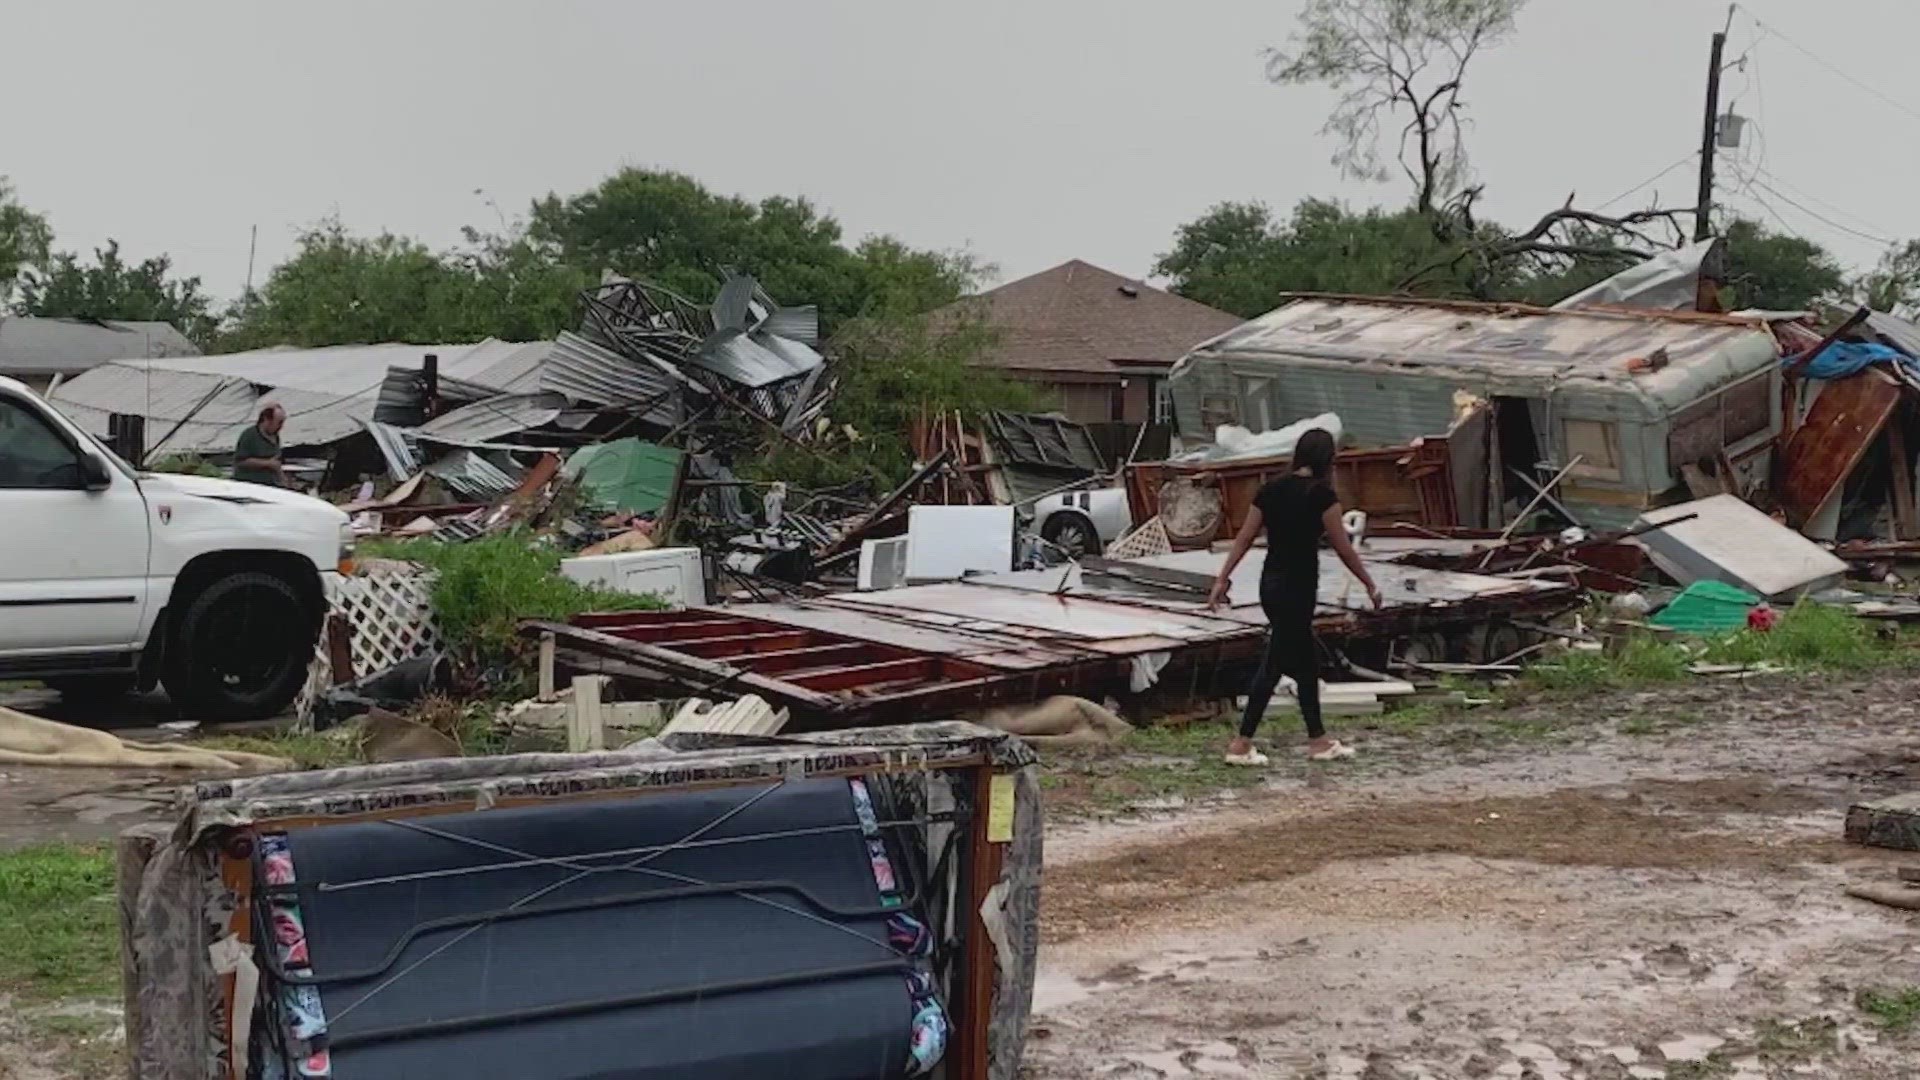 It happened around 4 a.m. Saturday, according to Port Isabel Police. A shelter has been opened for affected Texans.